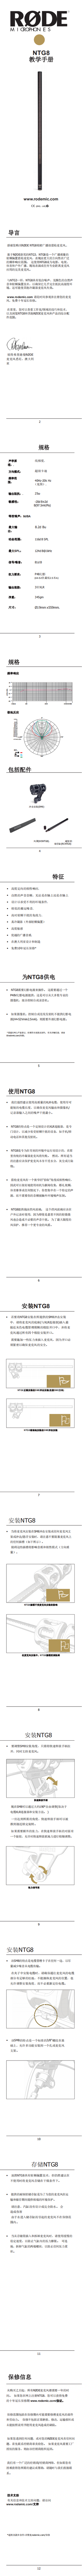 NTG8_user_manual_1_12_translate_Chinese_0.png